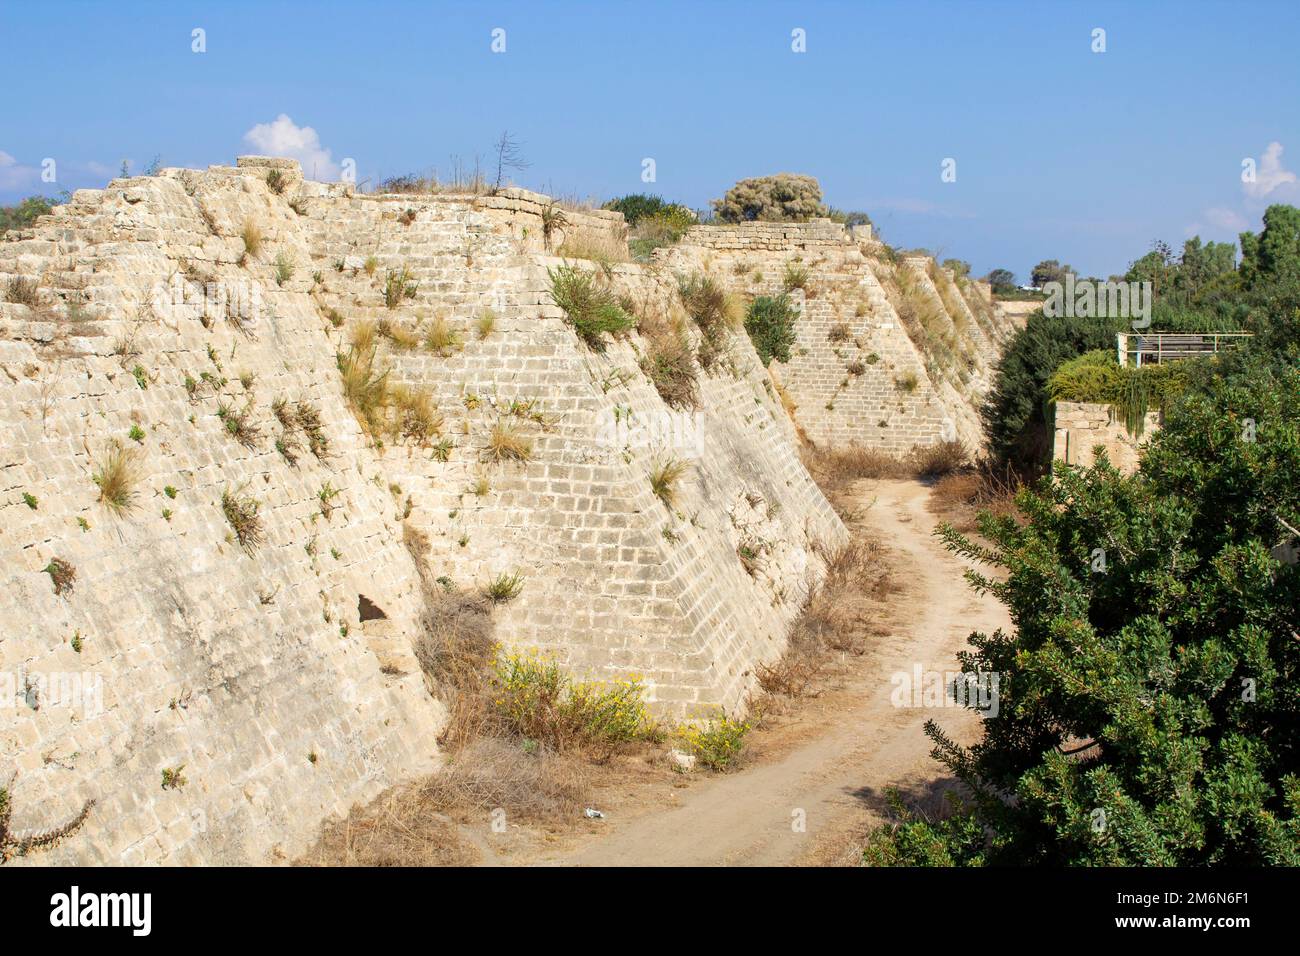 3 Nov 2022 A section of the ancient Crusader fortifications and dry moat in the coastal region of the Caeserea Maritima National Park in Judae Israel Stock Photo